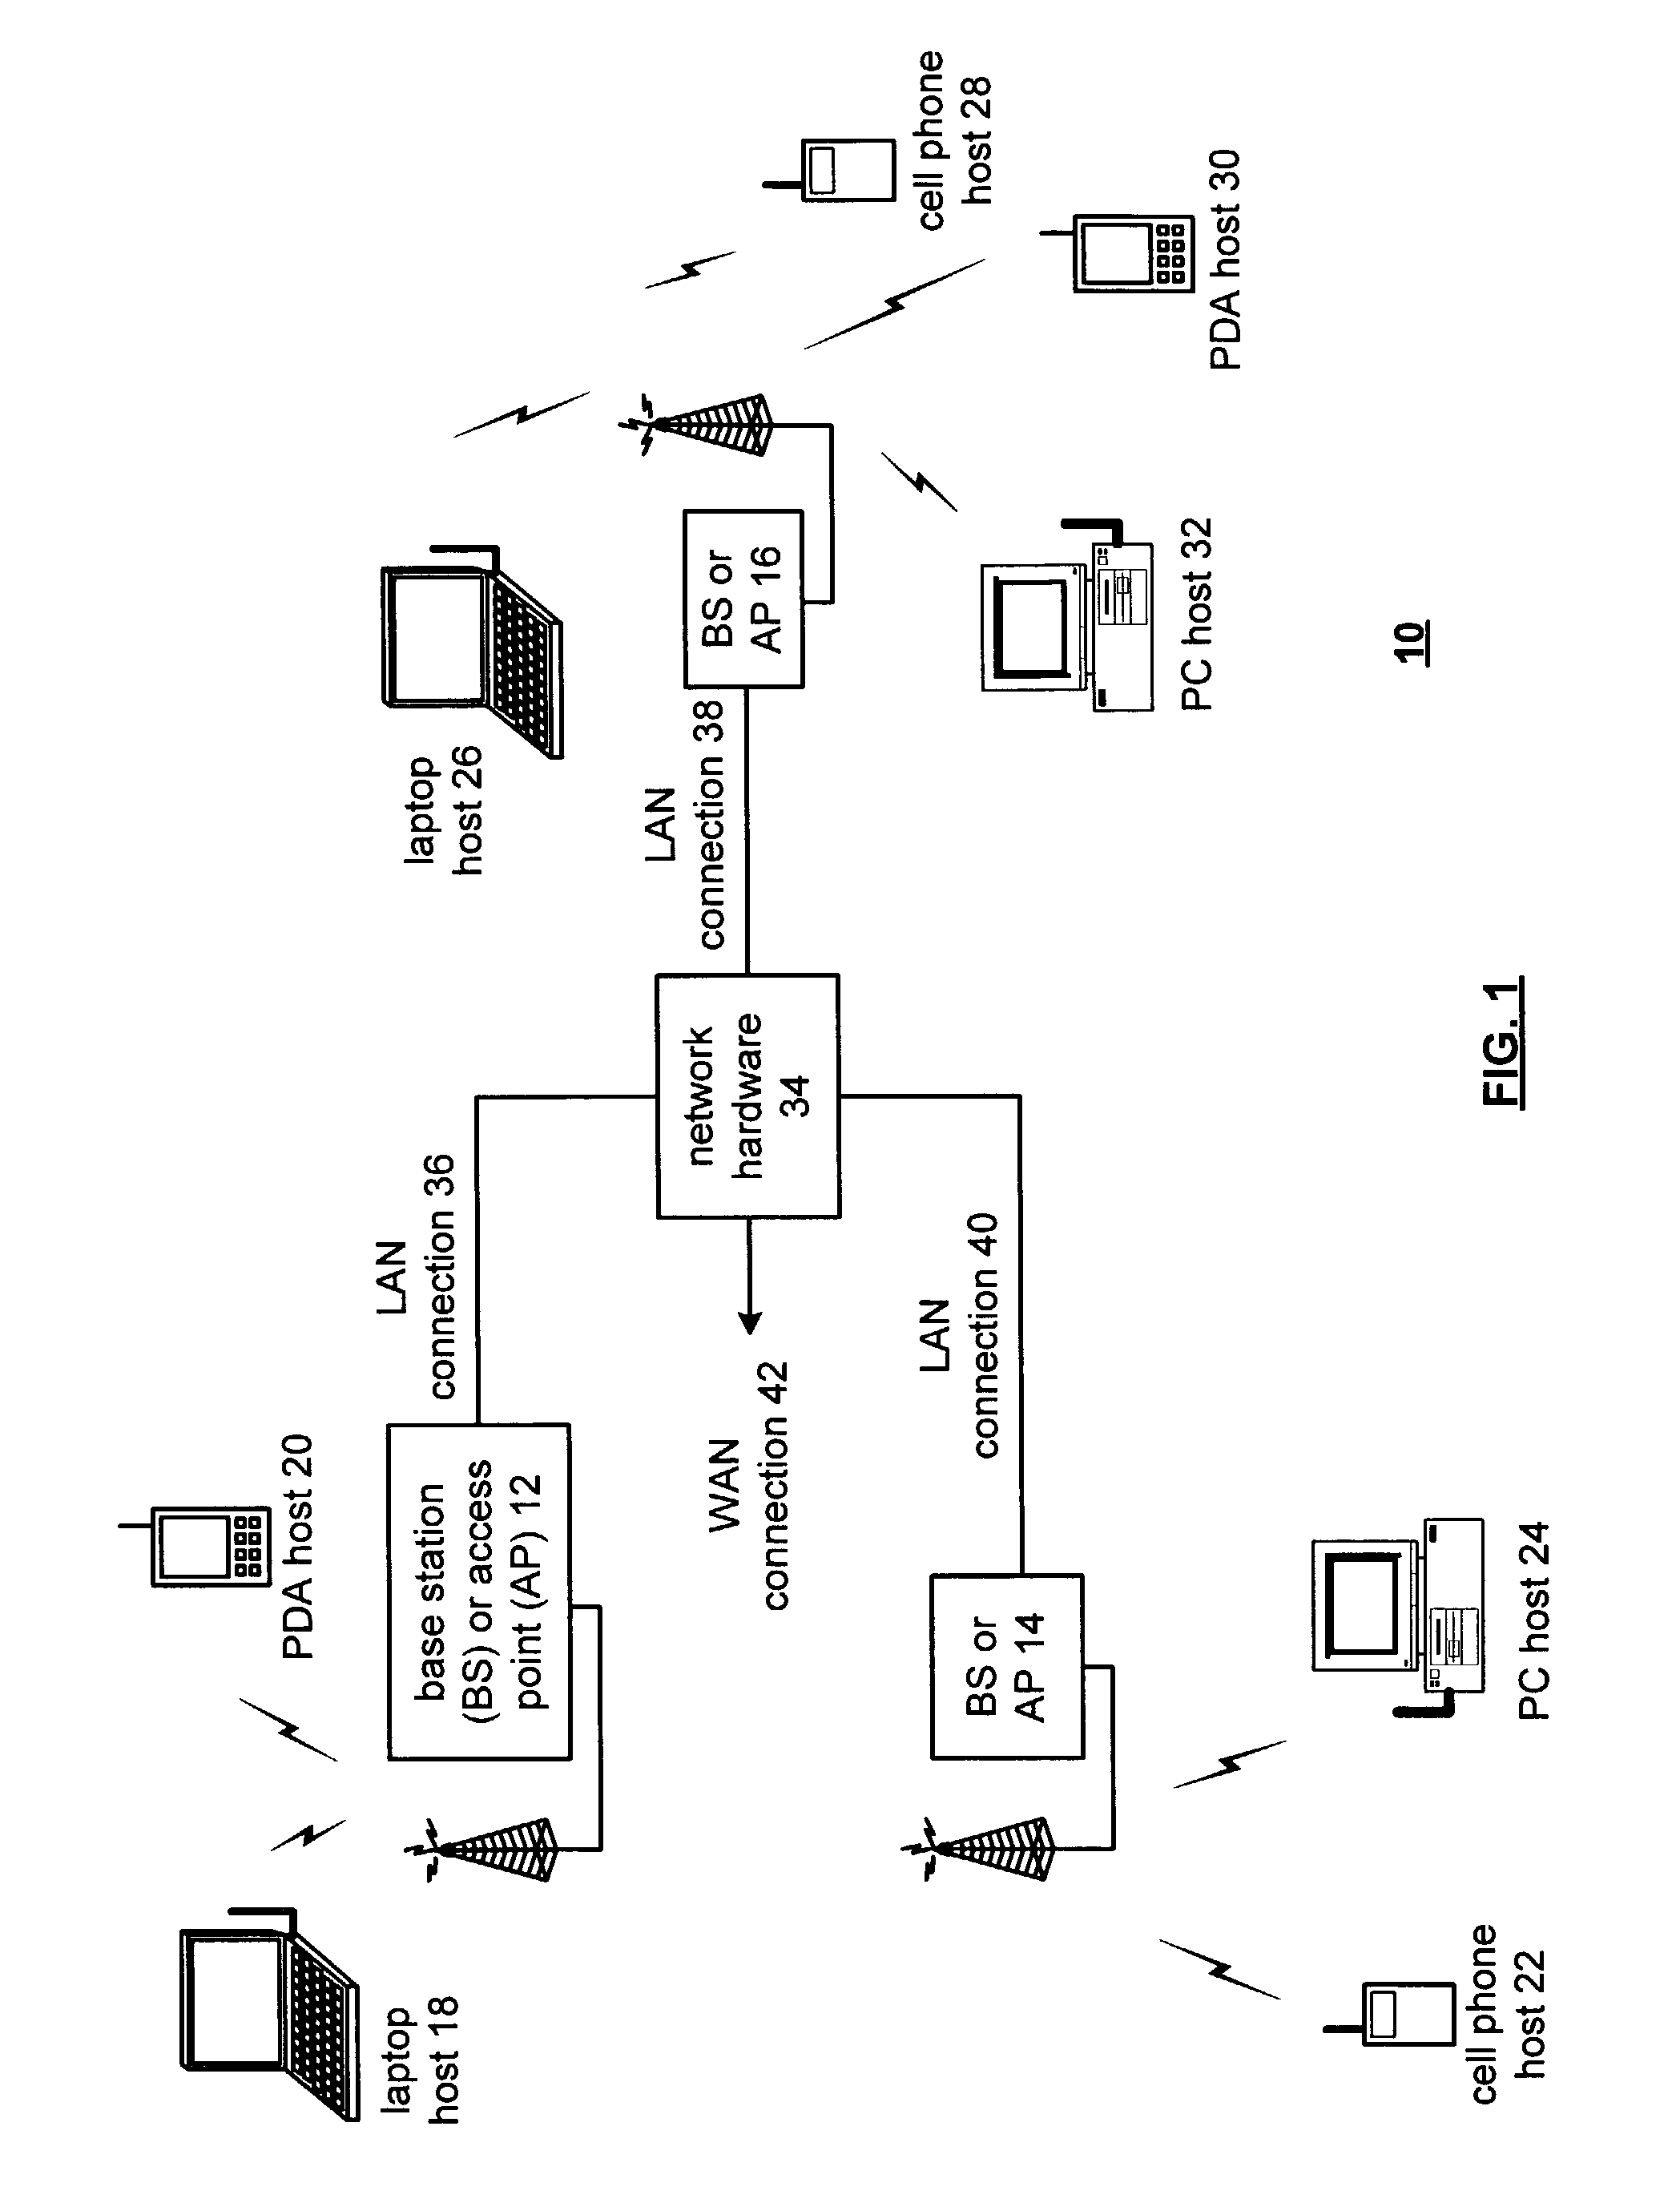 Linearized fractional-N synthesizer having a gated offset